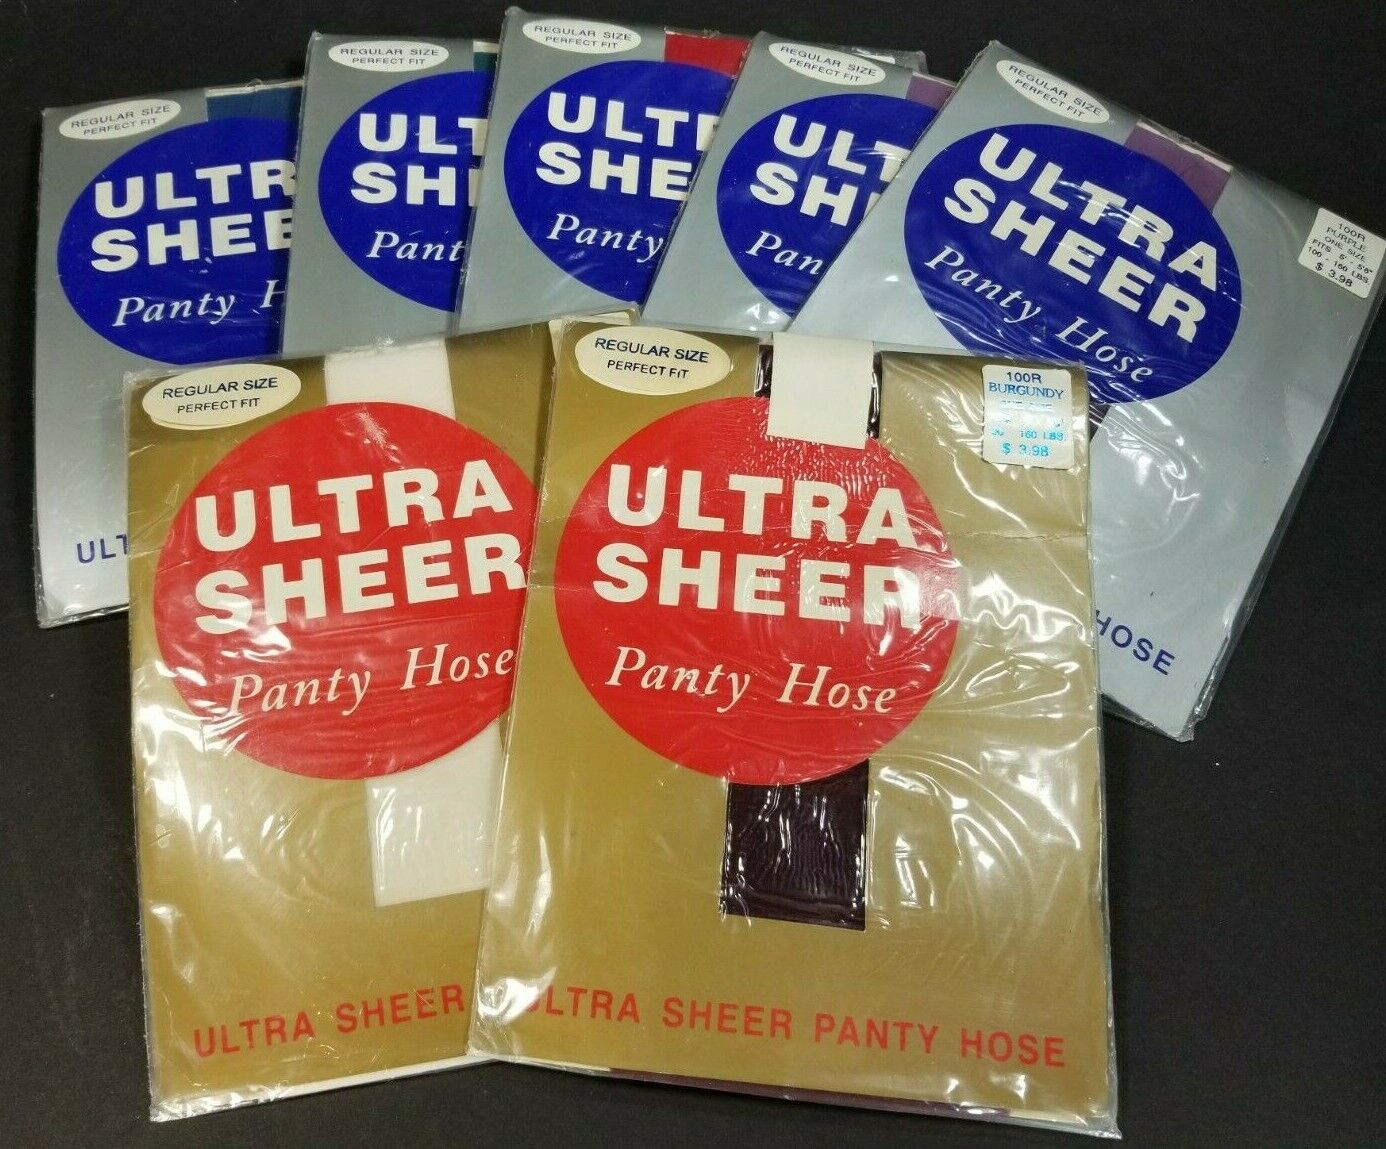 Vintage 80s Lot of 6 Ultra Sheer Panty Hose in Assorted Colors Regular Size 100R Ultra Sheer Does Not Apply